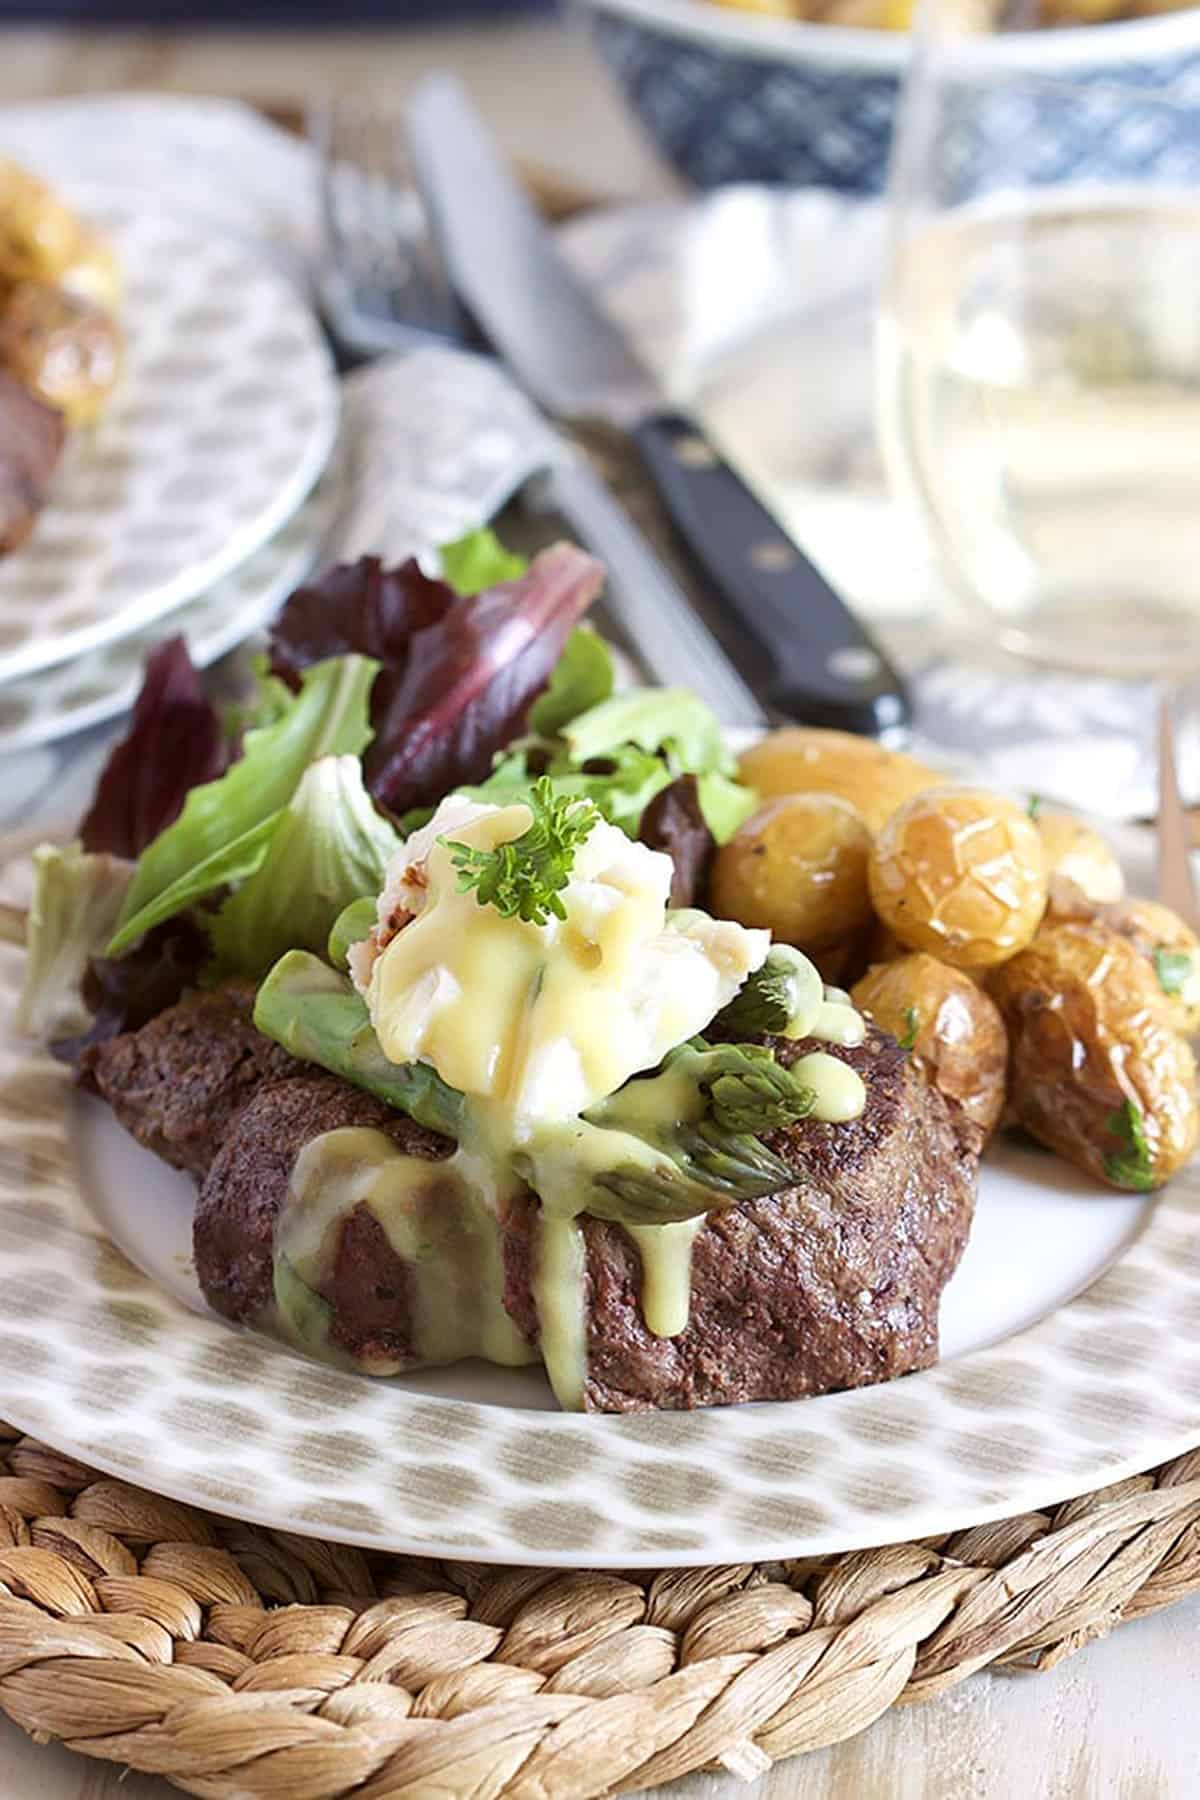 Filet Oscar, or Oscar Style Steak, on a plate with roasted potatoes and salad